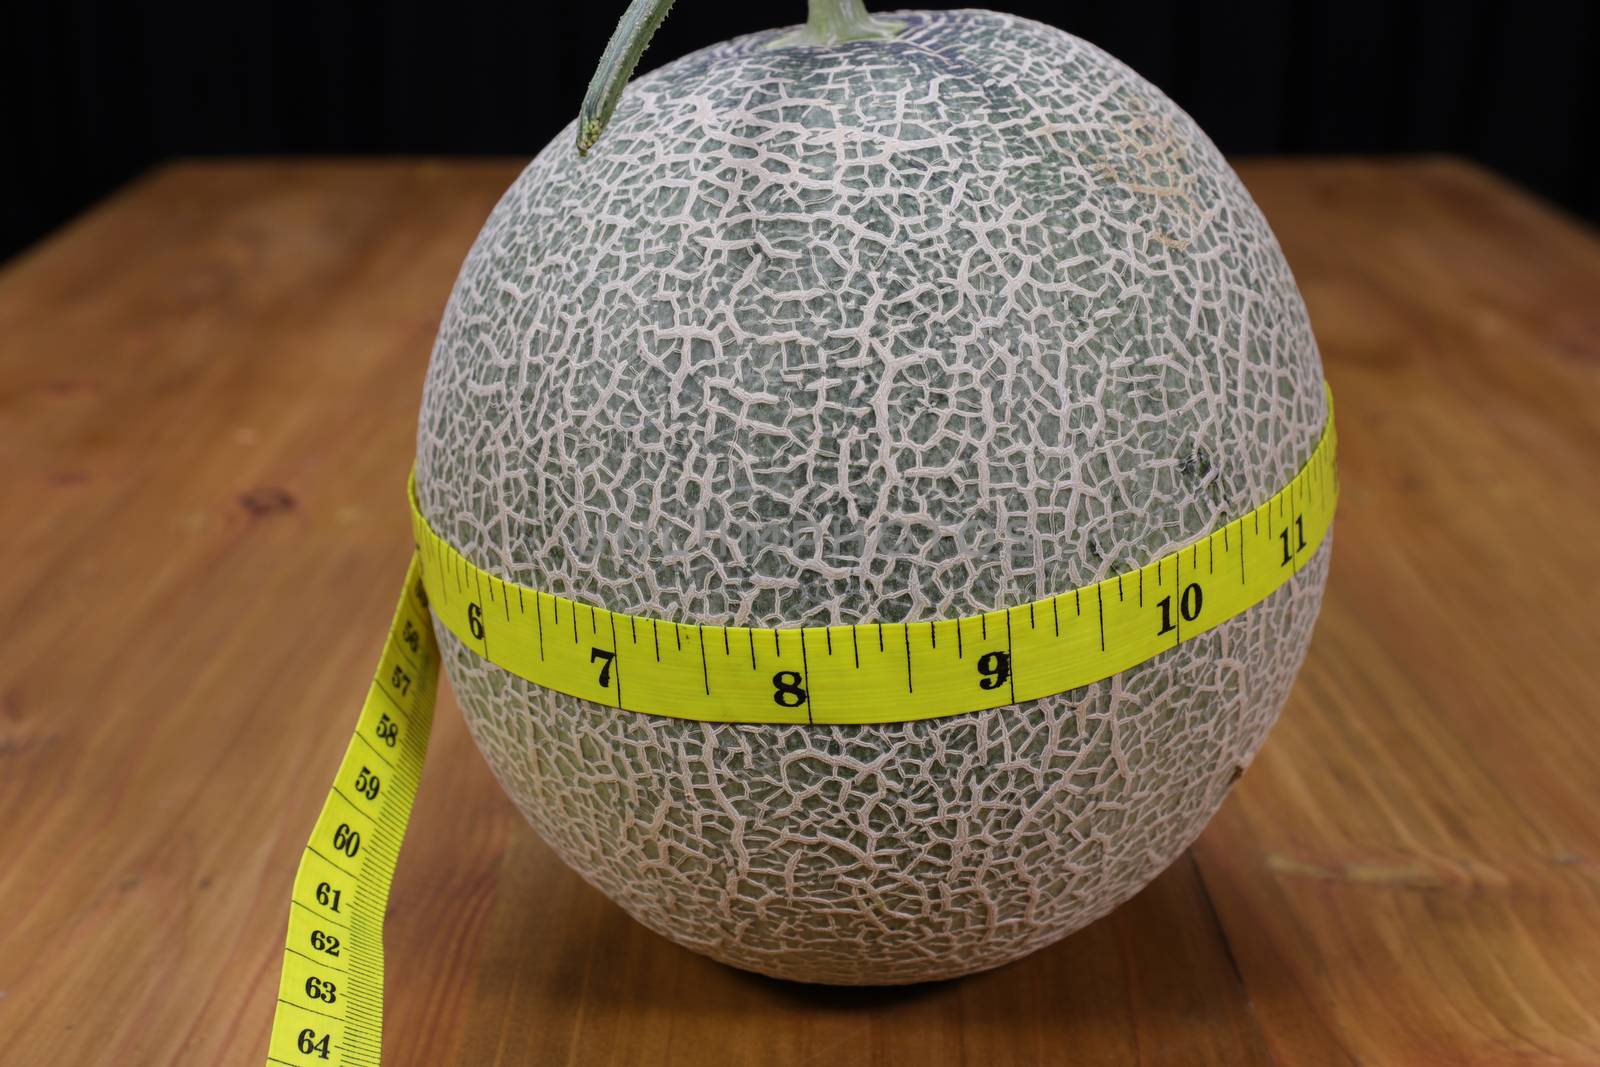 A cantaloupe and a measuring tape by Nawoot